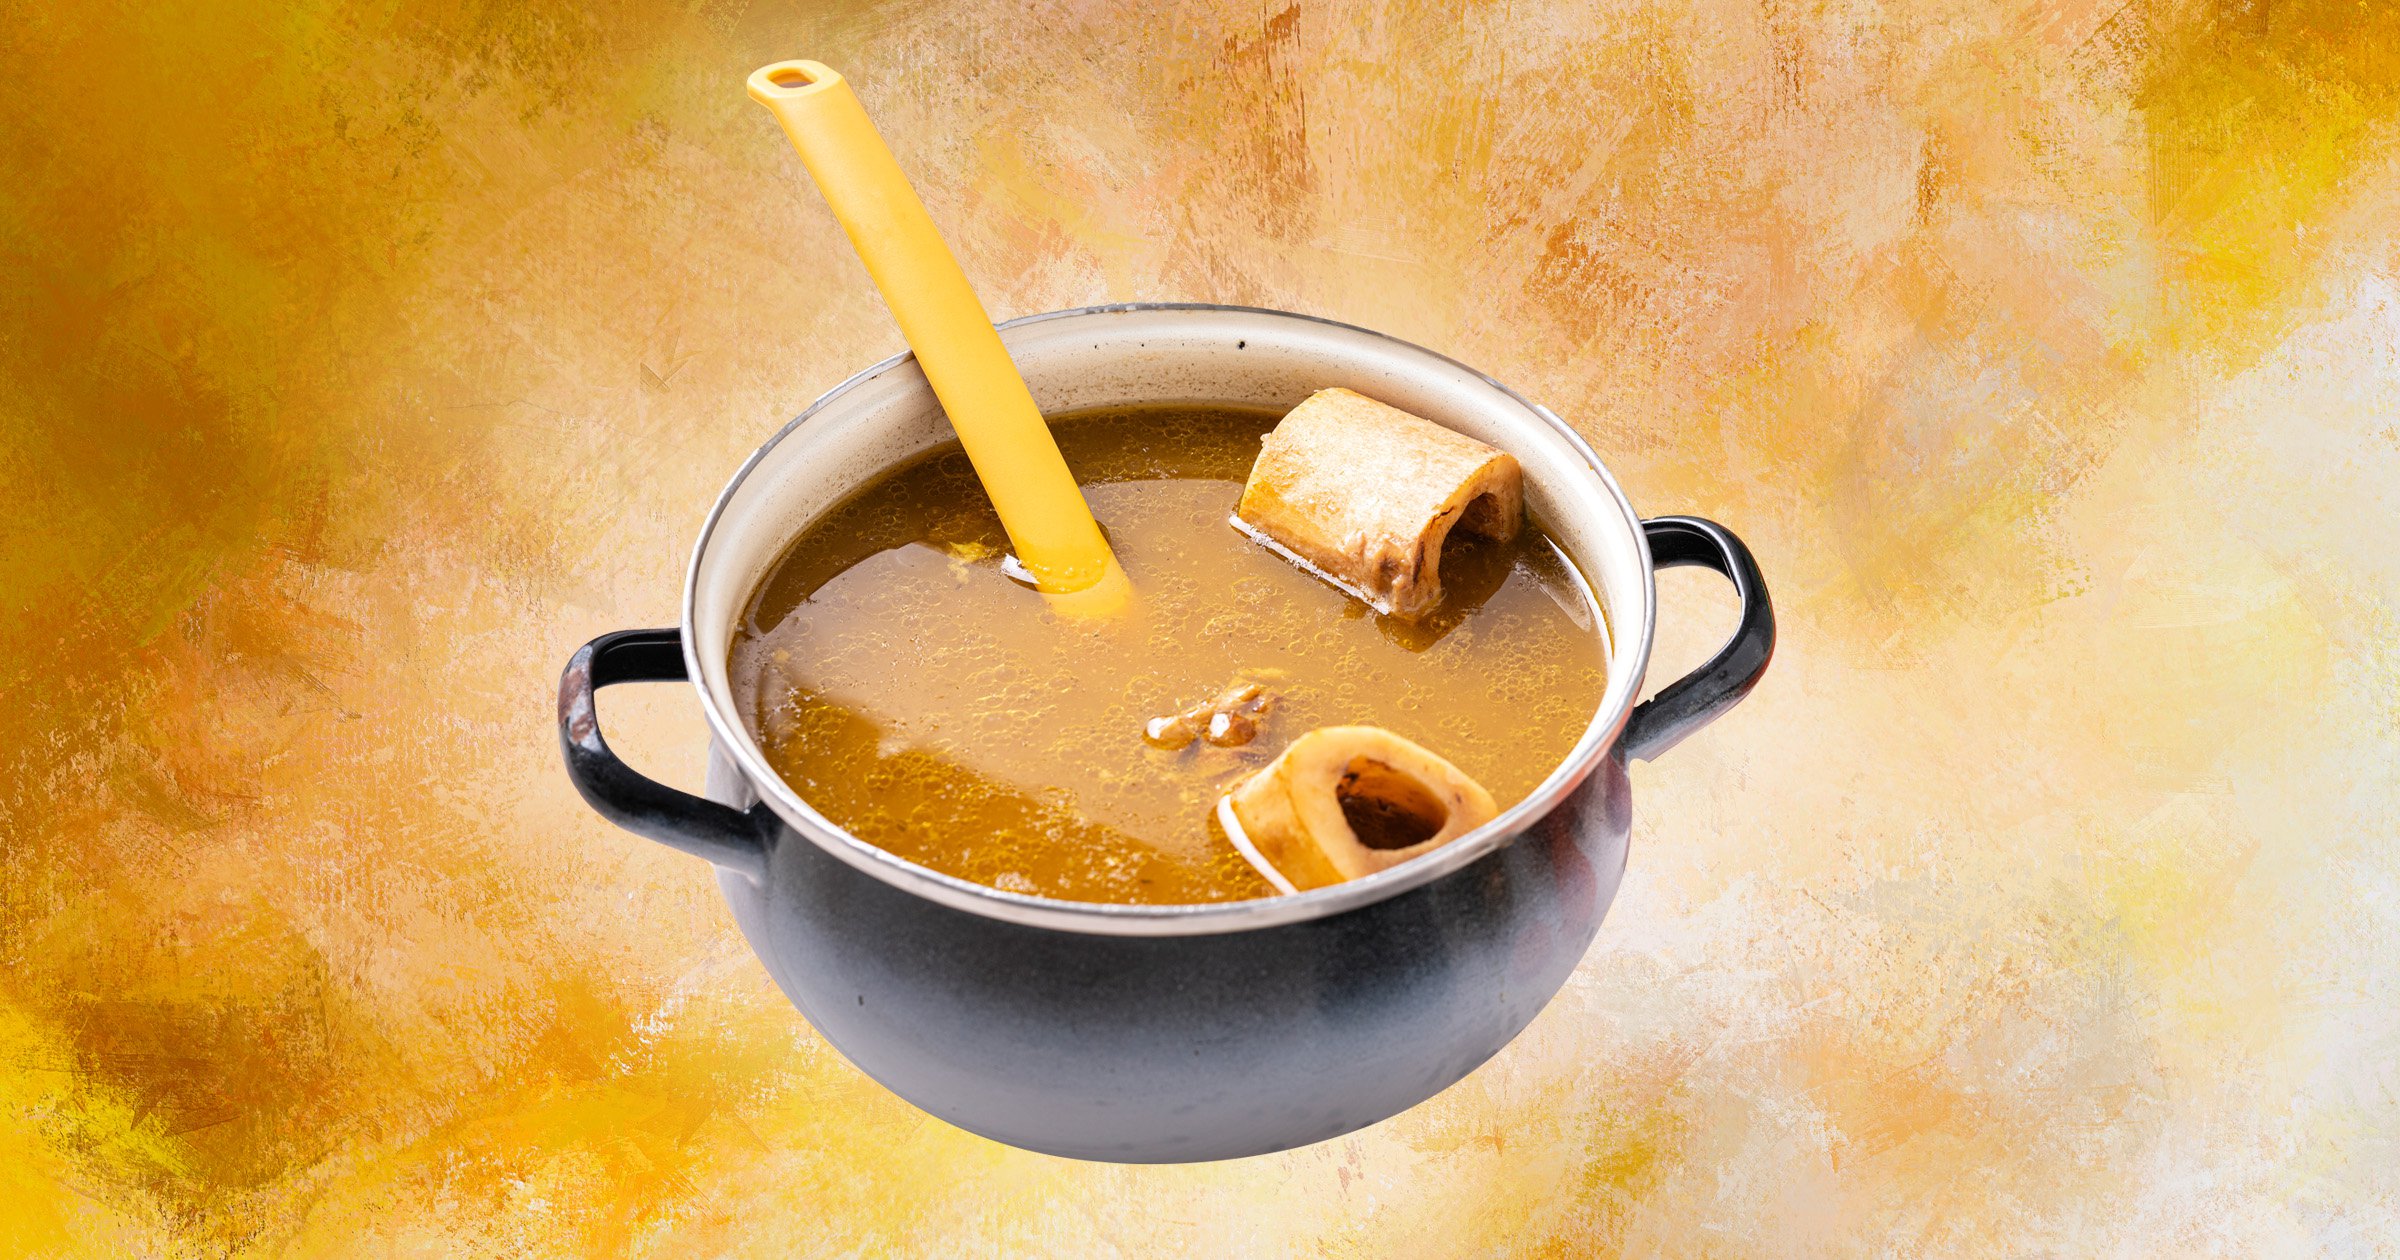 Bone broth is trending on TikTok – but is it really good for you? Experts weigh in